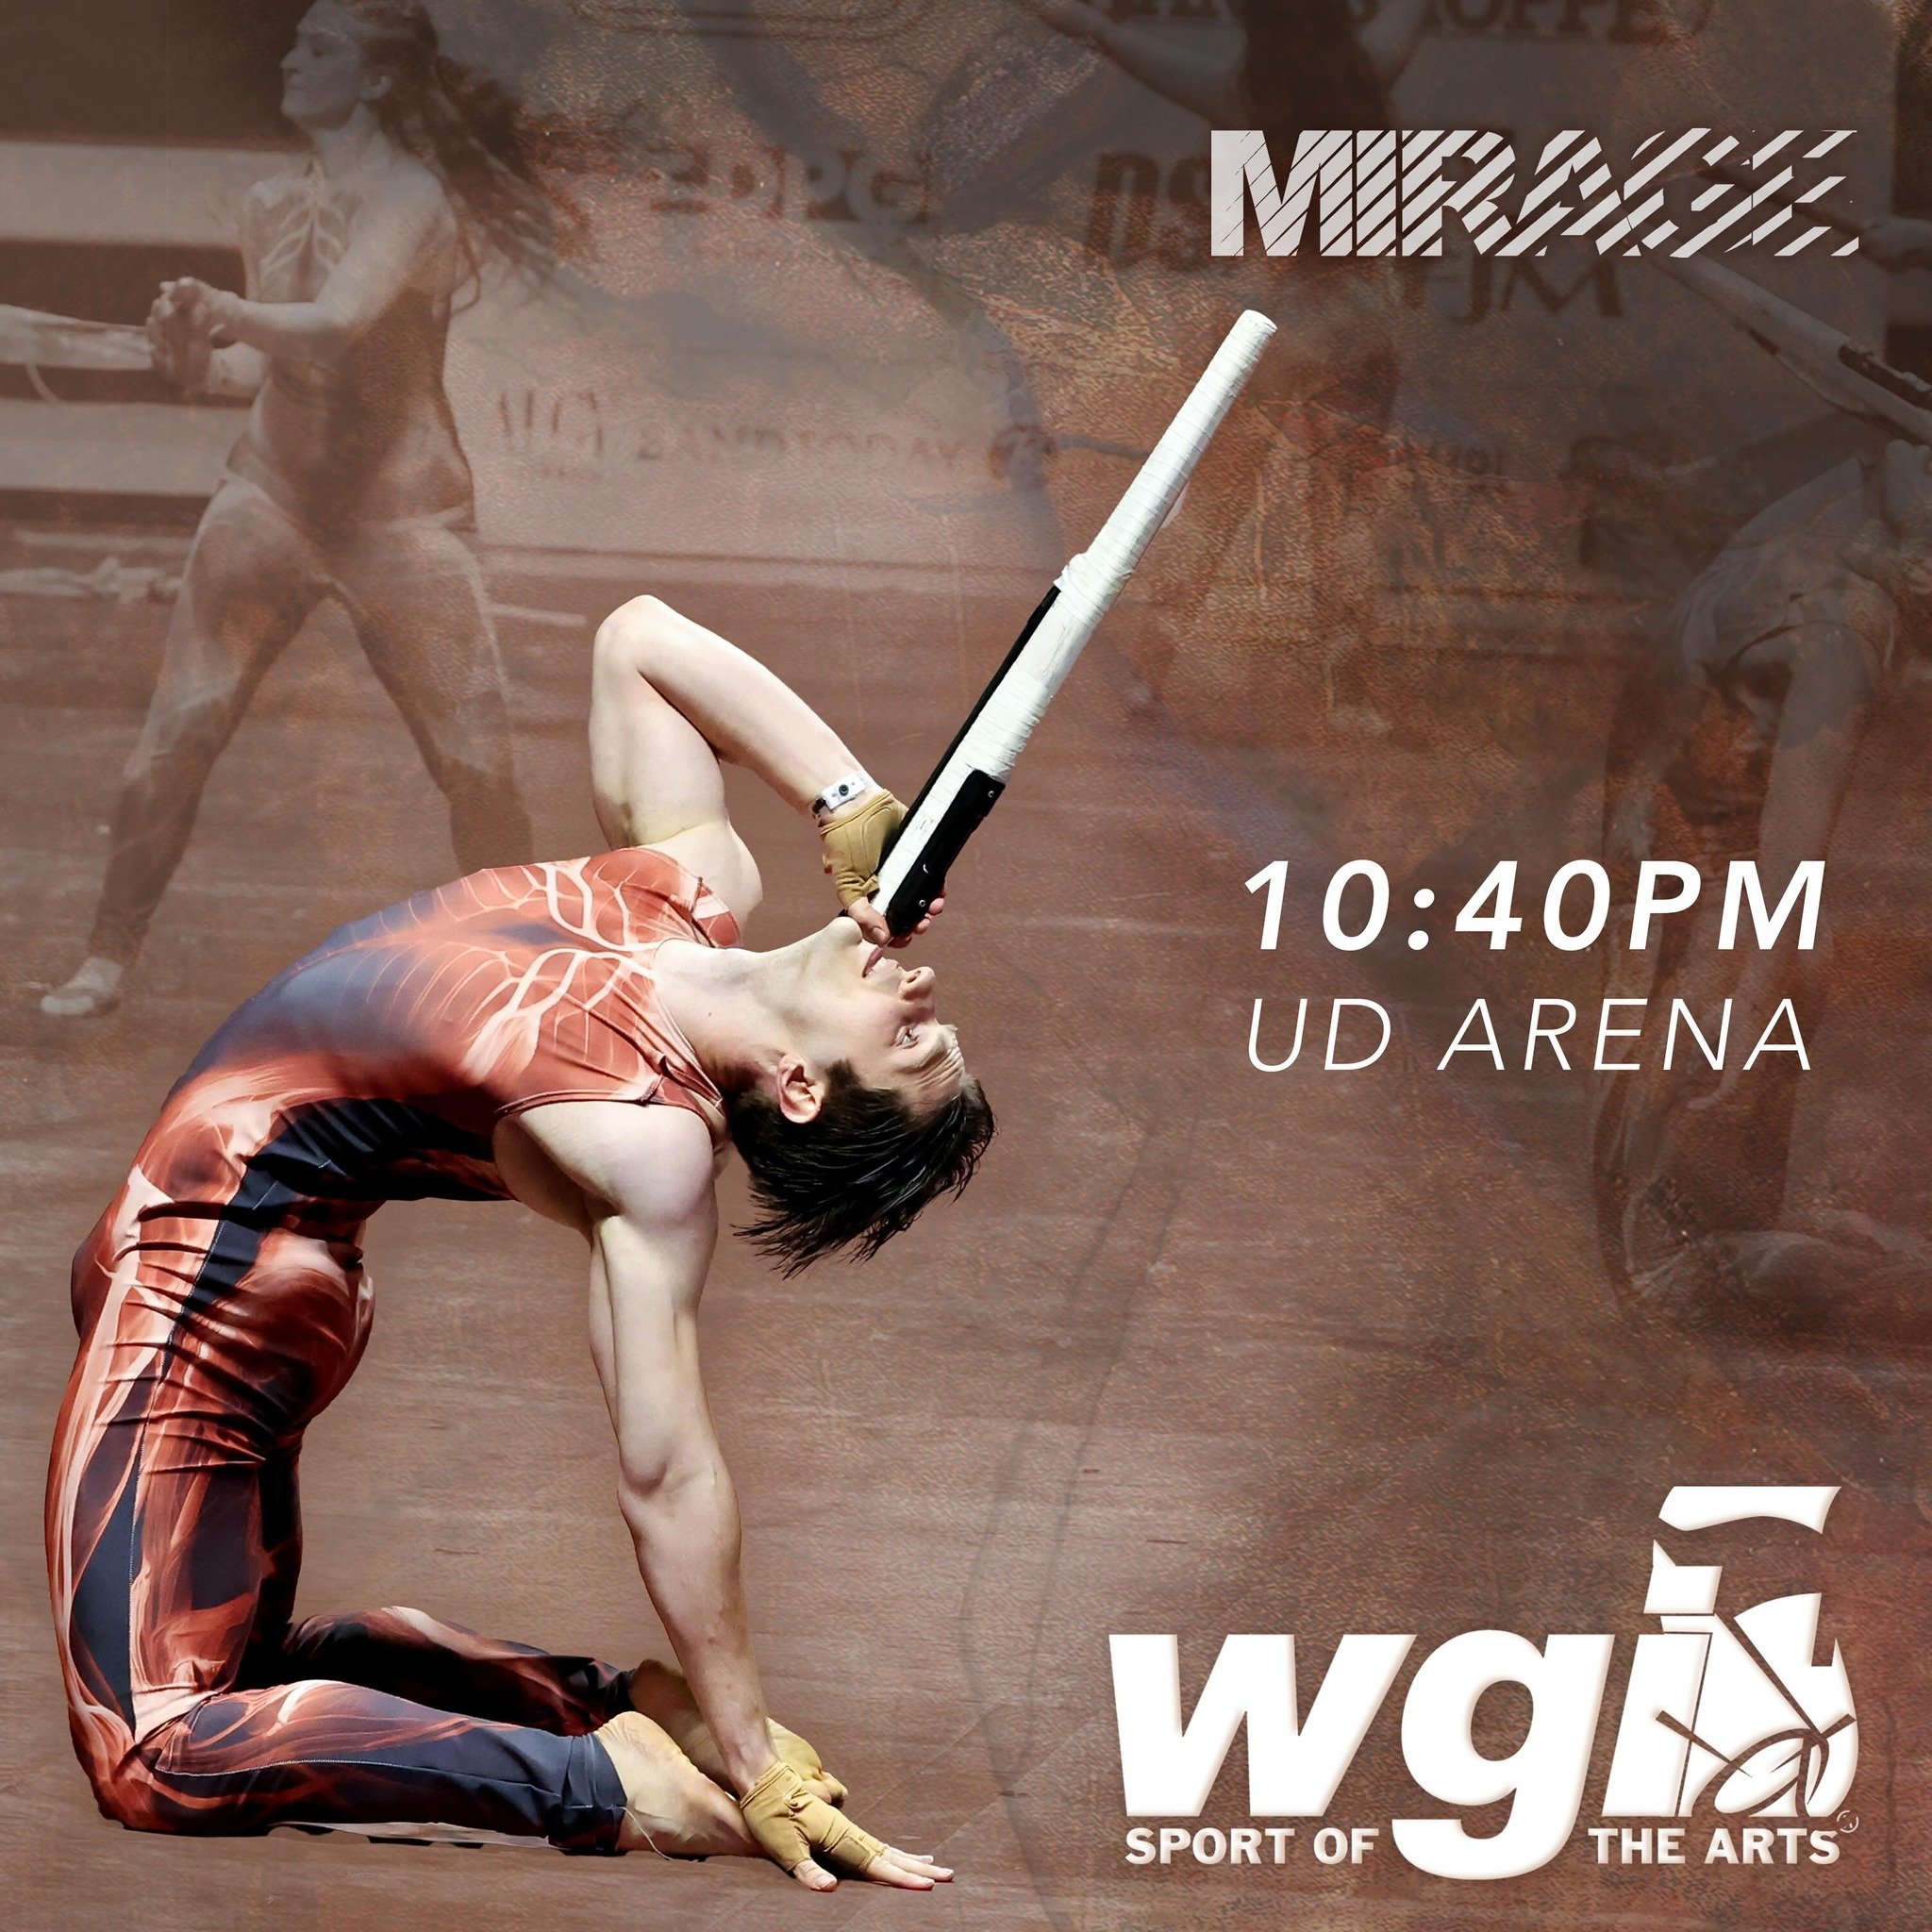 WGI is here! We&rsquo;re excited to perform at WGI prelims tomorrow at 10:40PM in the UD Arena.